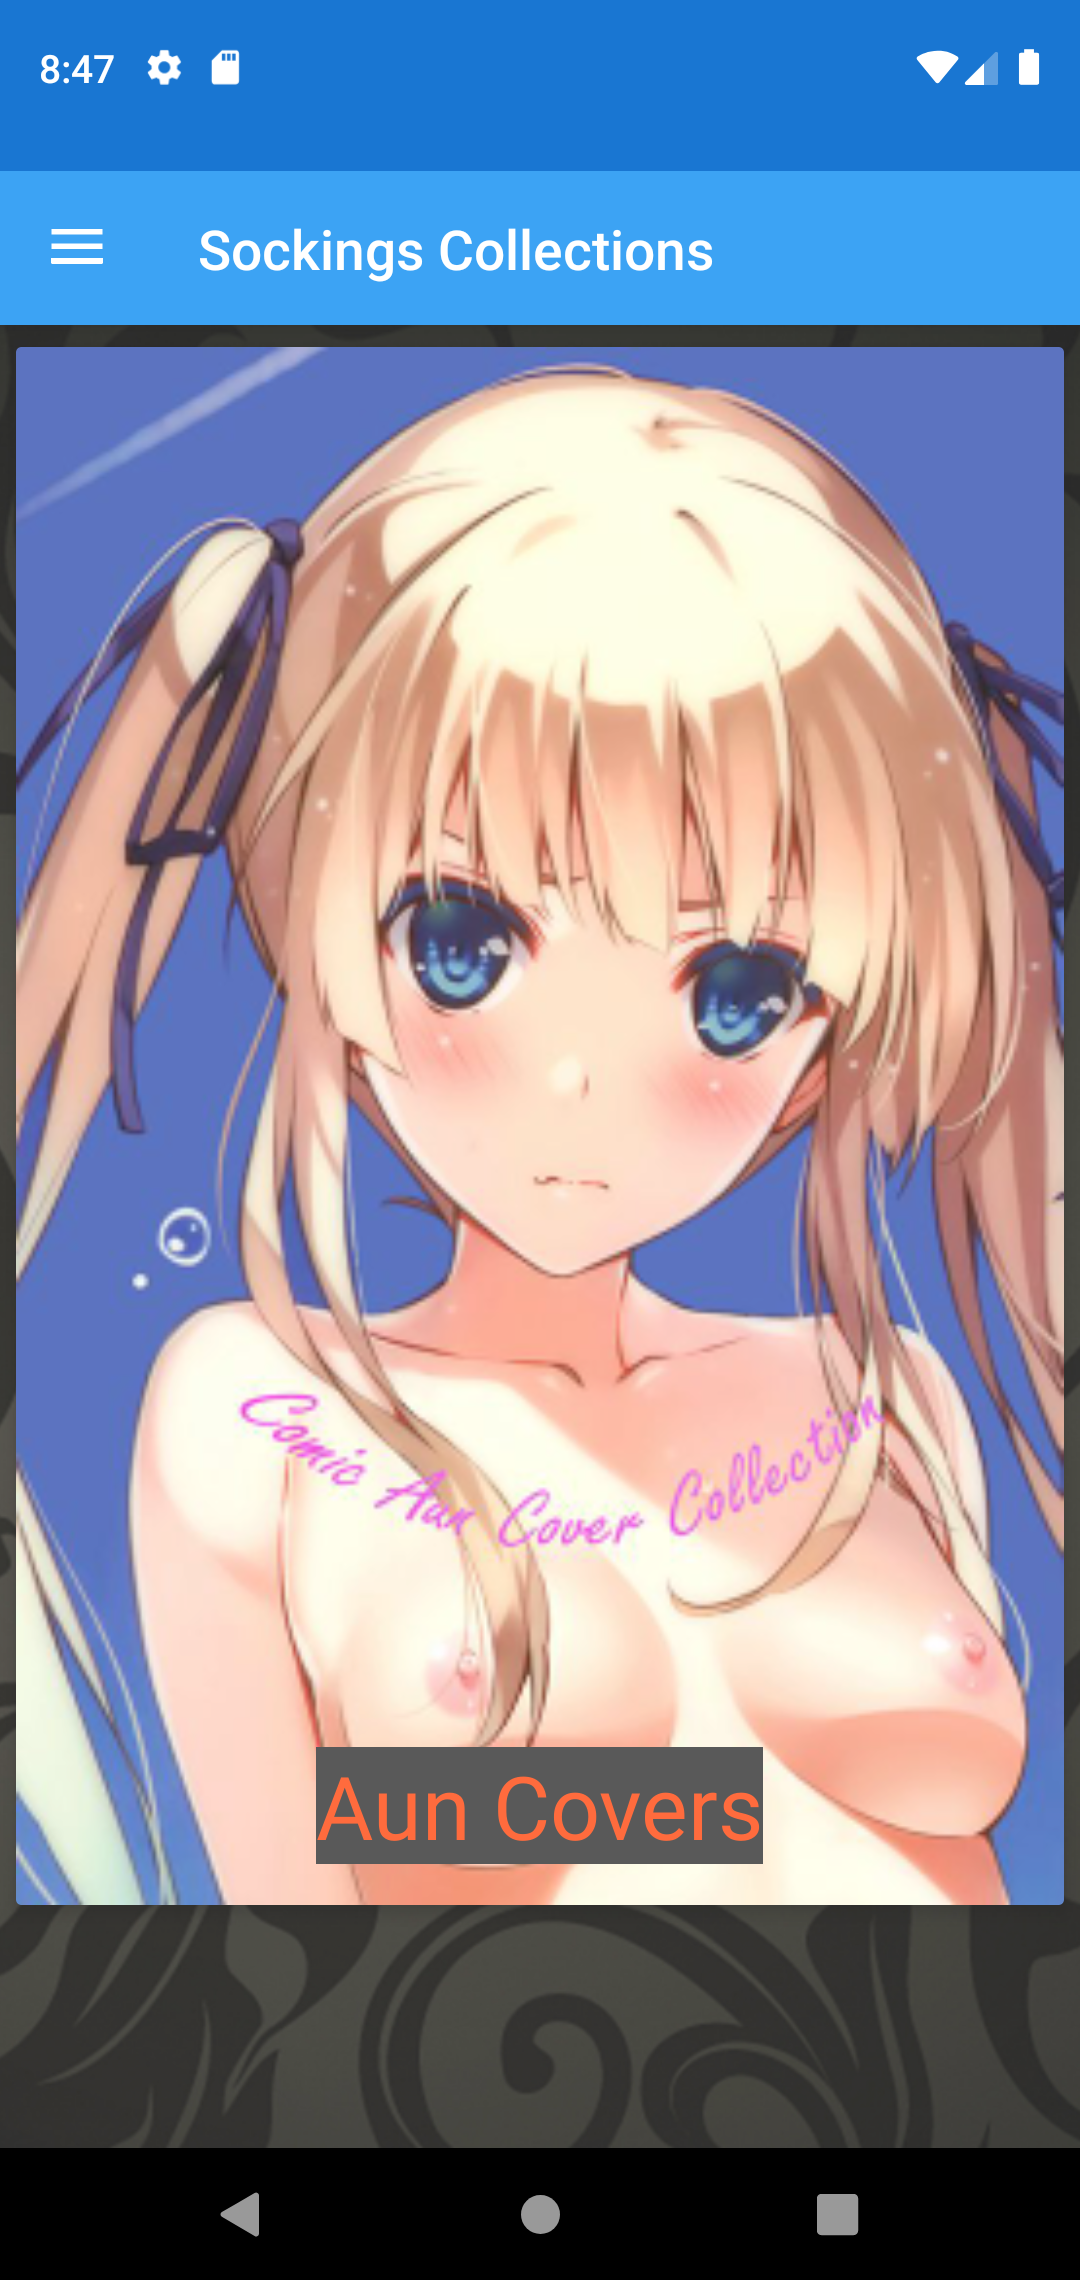 Sockings Collections pictures,apk,sex,immage,hot,android,wallpaper,shemale,hentai,mature,hintai,cosplay,hentsi,app,porn,henti,henta,download,comics,pics,stockings,anime,free,sexy